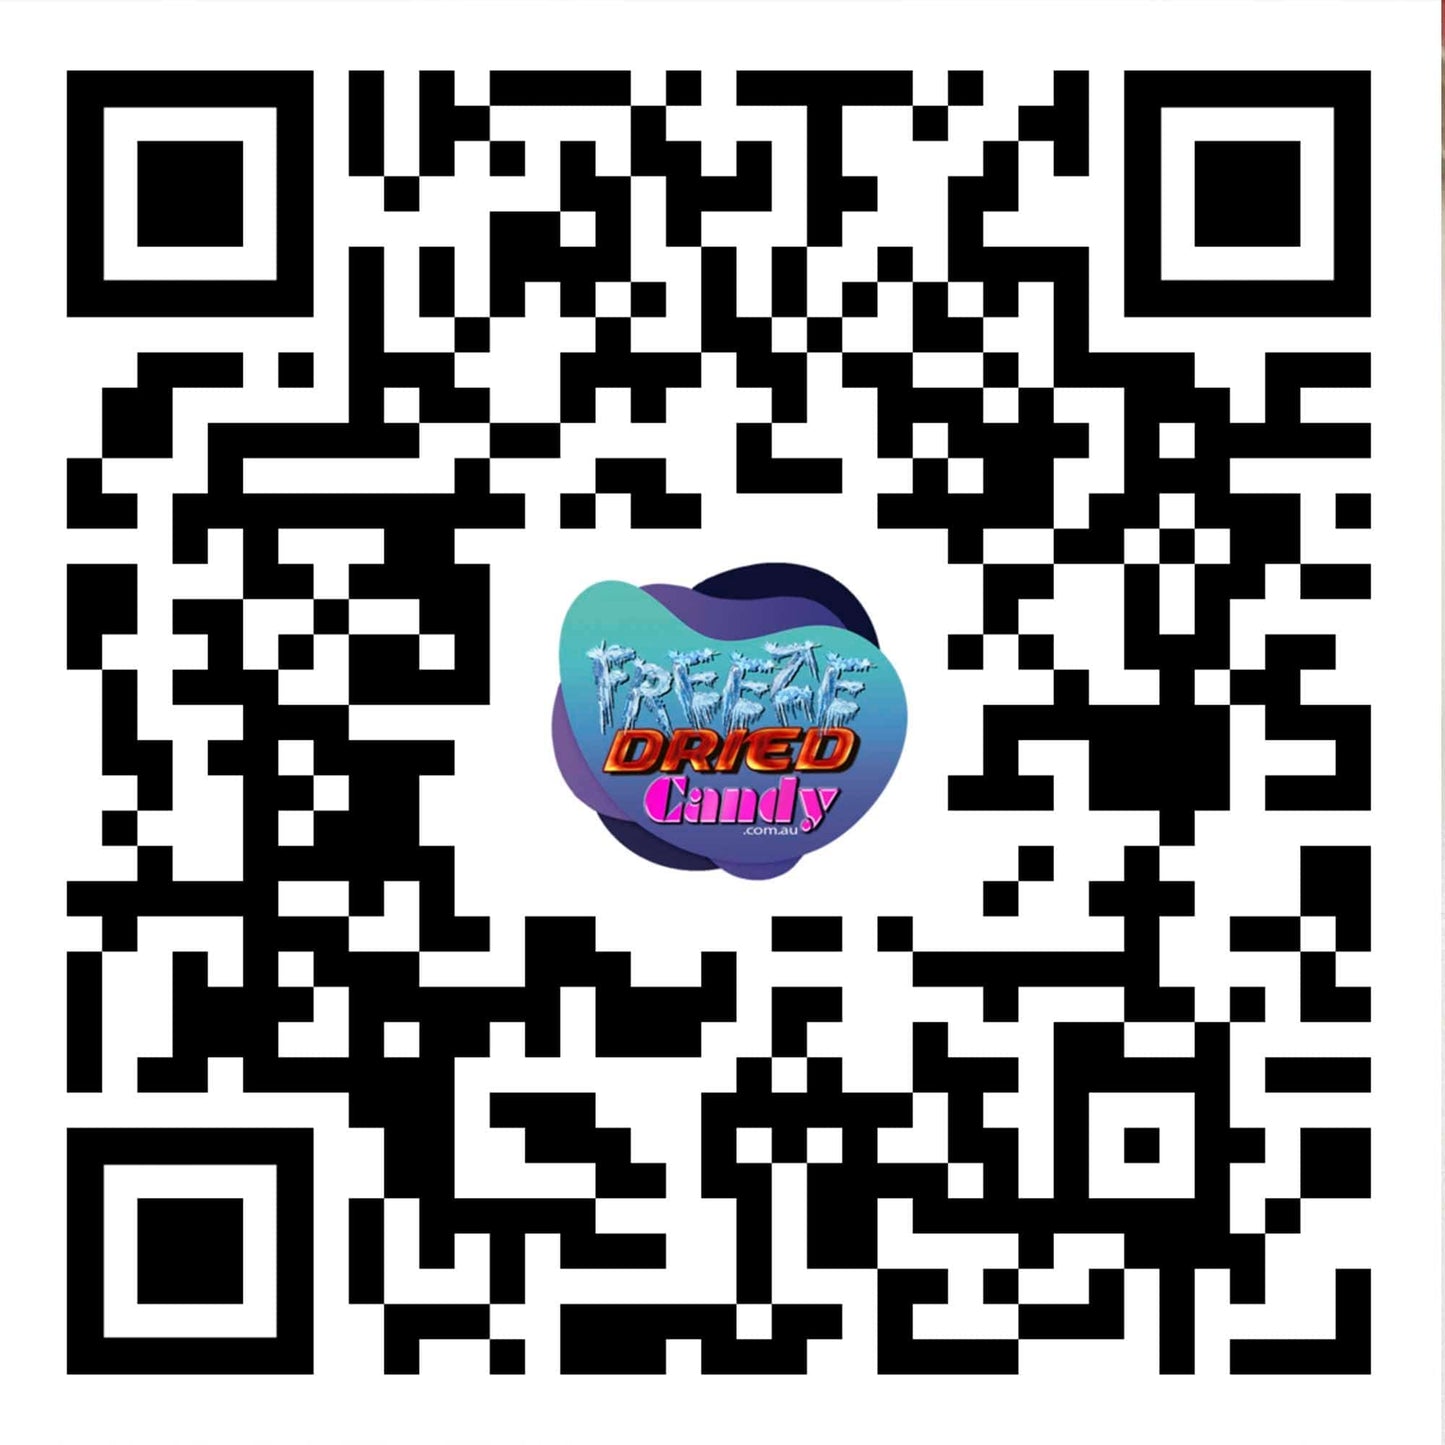 Freeze Dried Candy QR code, find us on the internet and social media